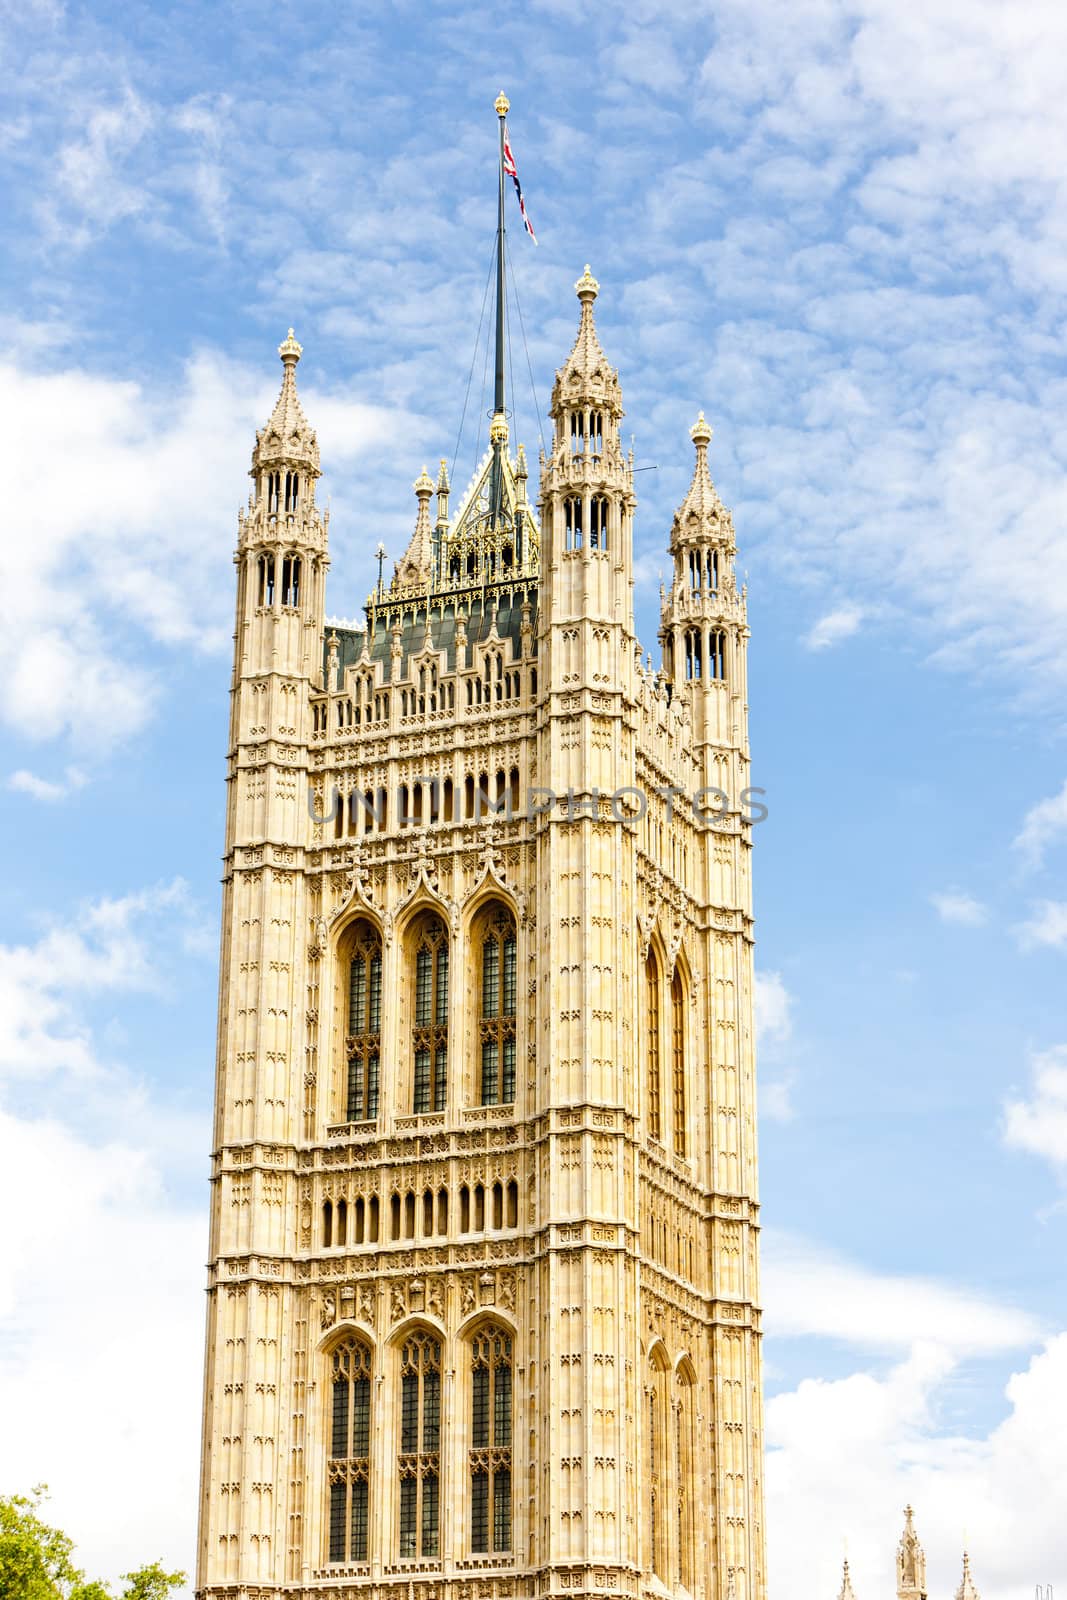 Victoria Tower, Westminster Palace, London, Great Britain by phbcz